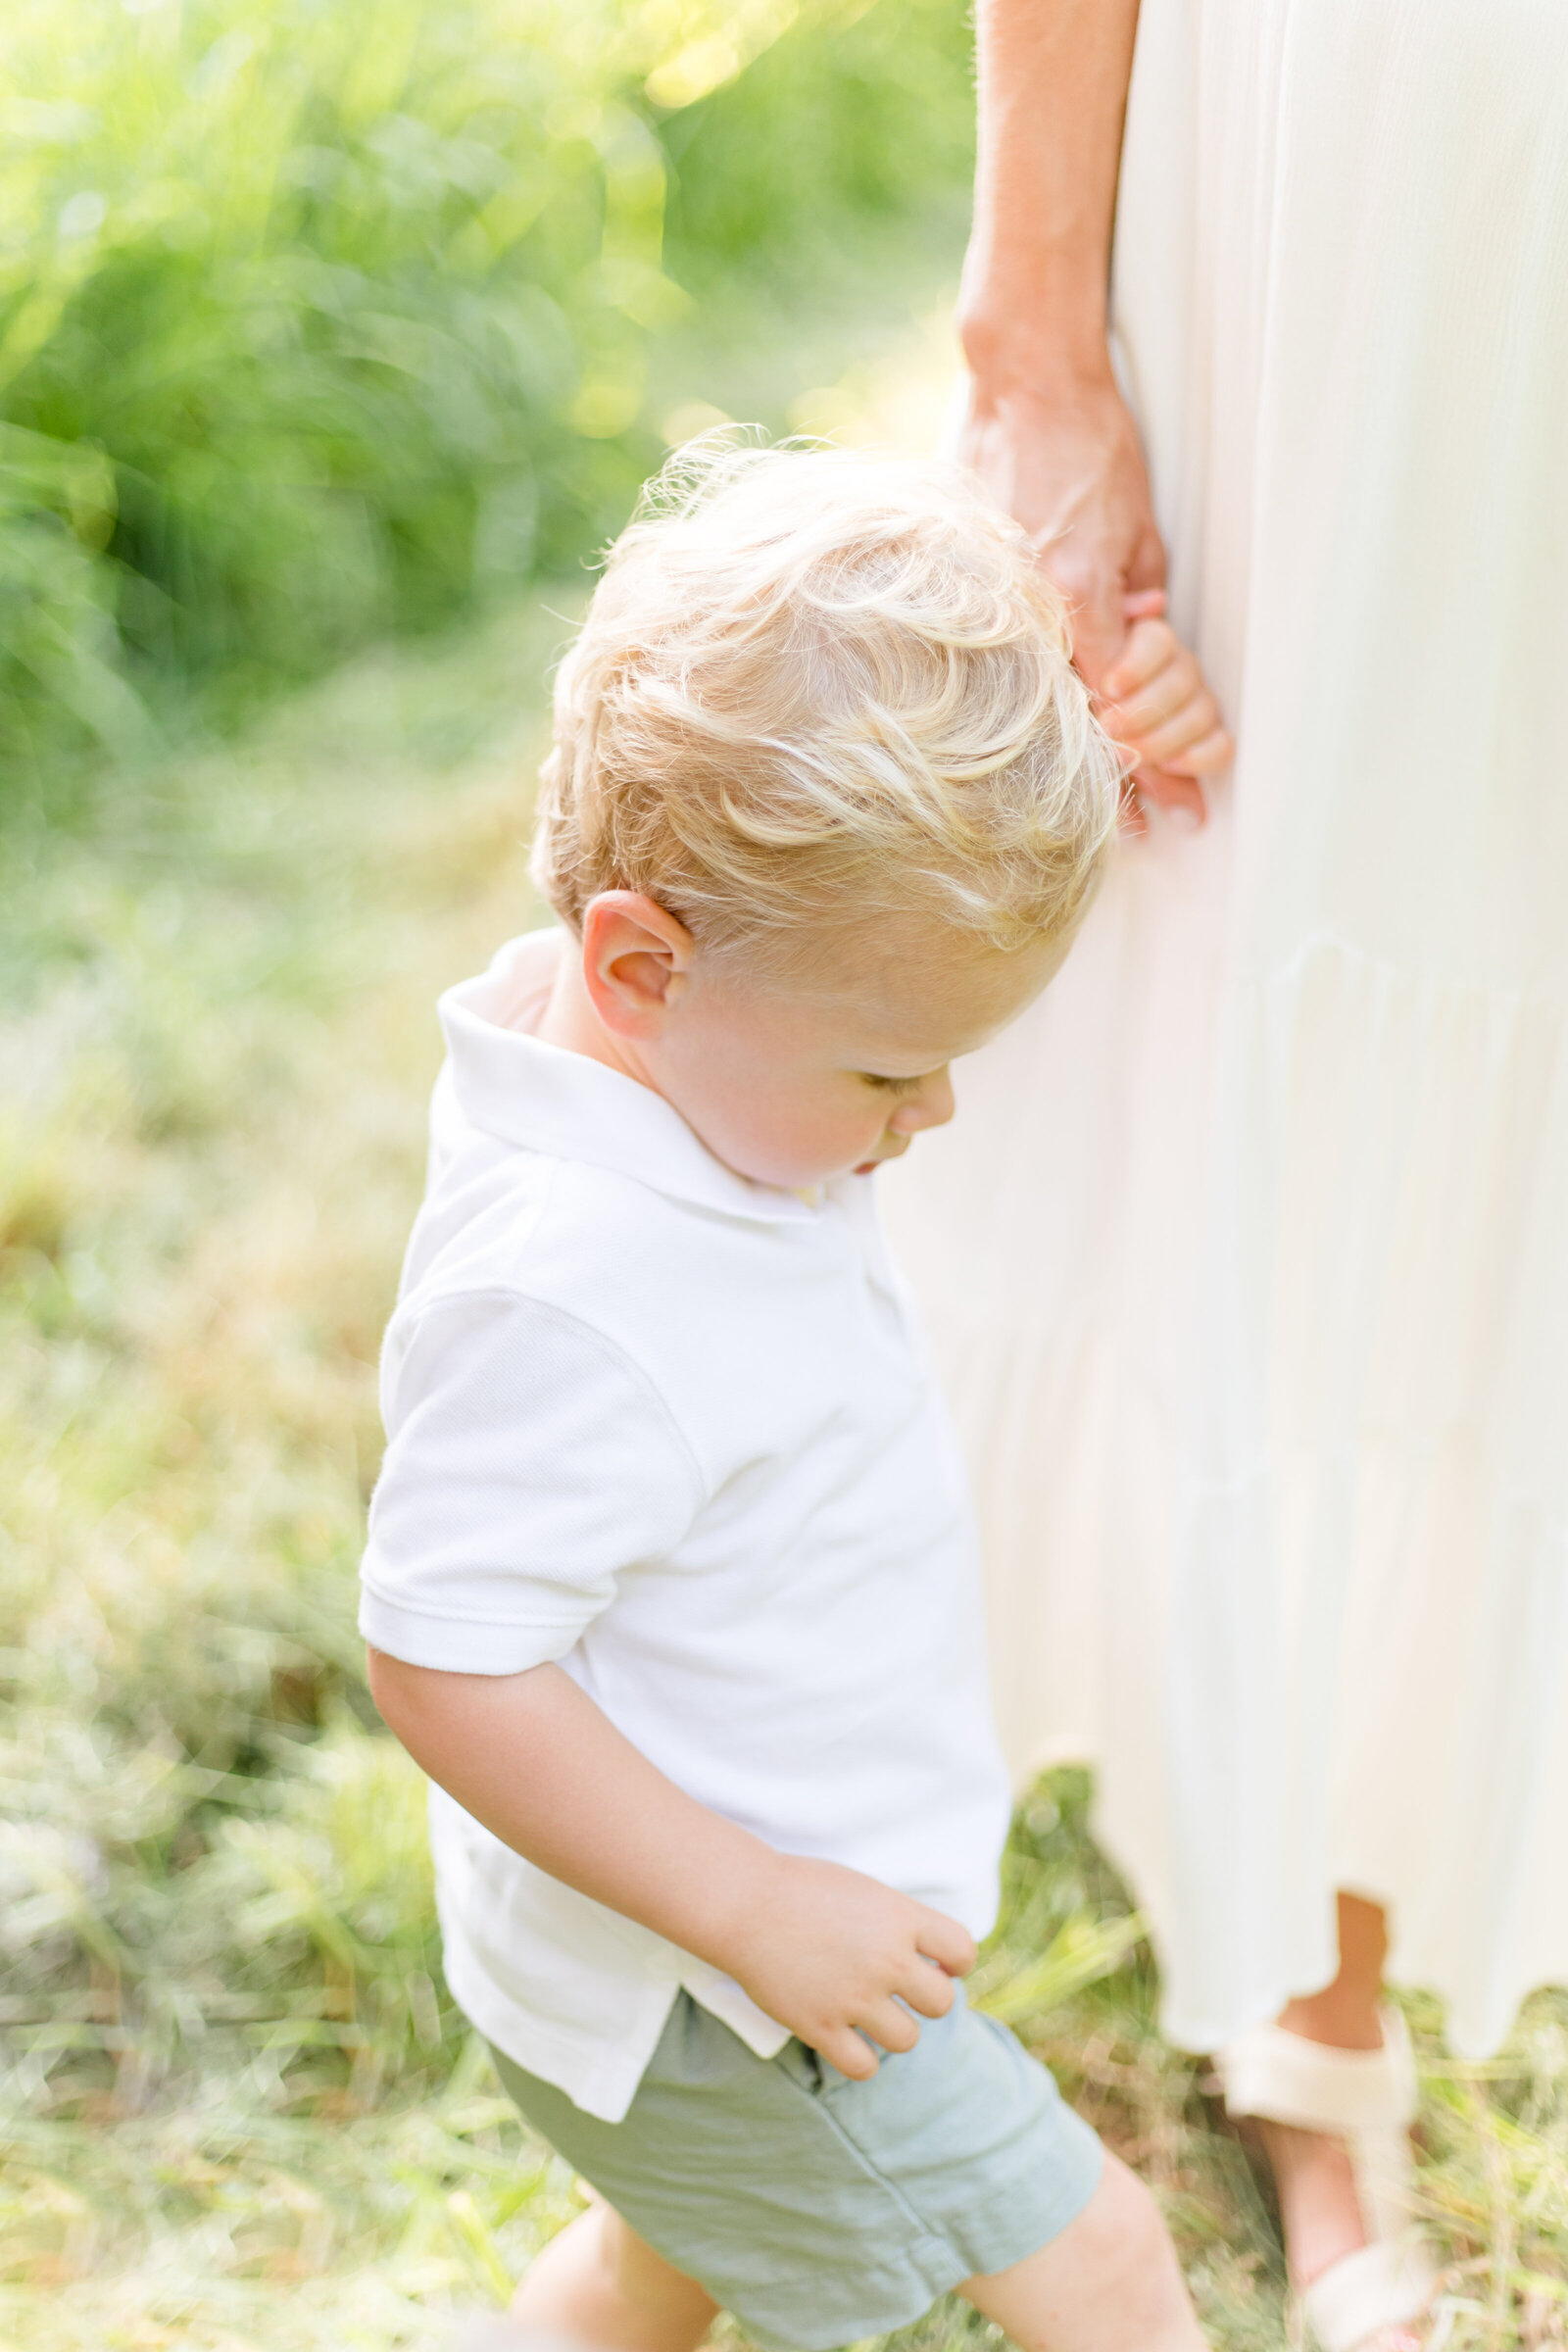 A young blonde boy standing while looking at the ground and holding his mother's hand